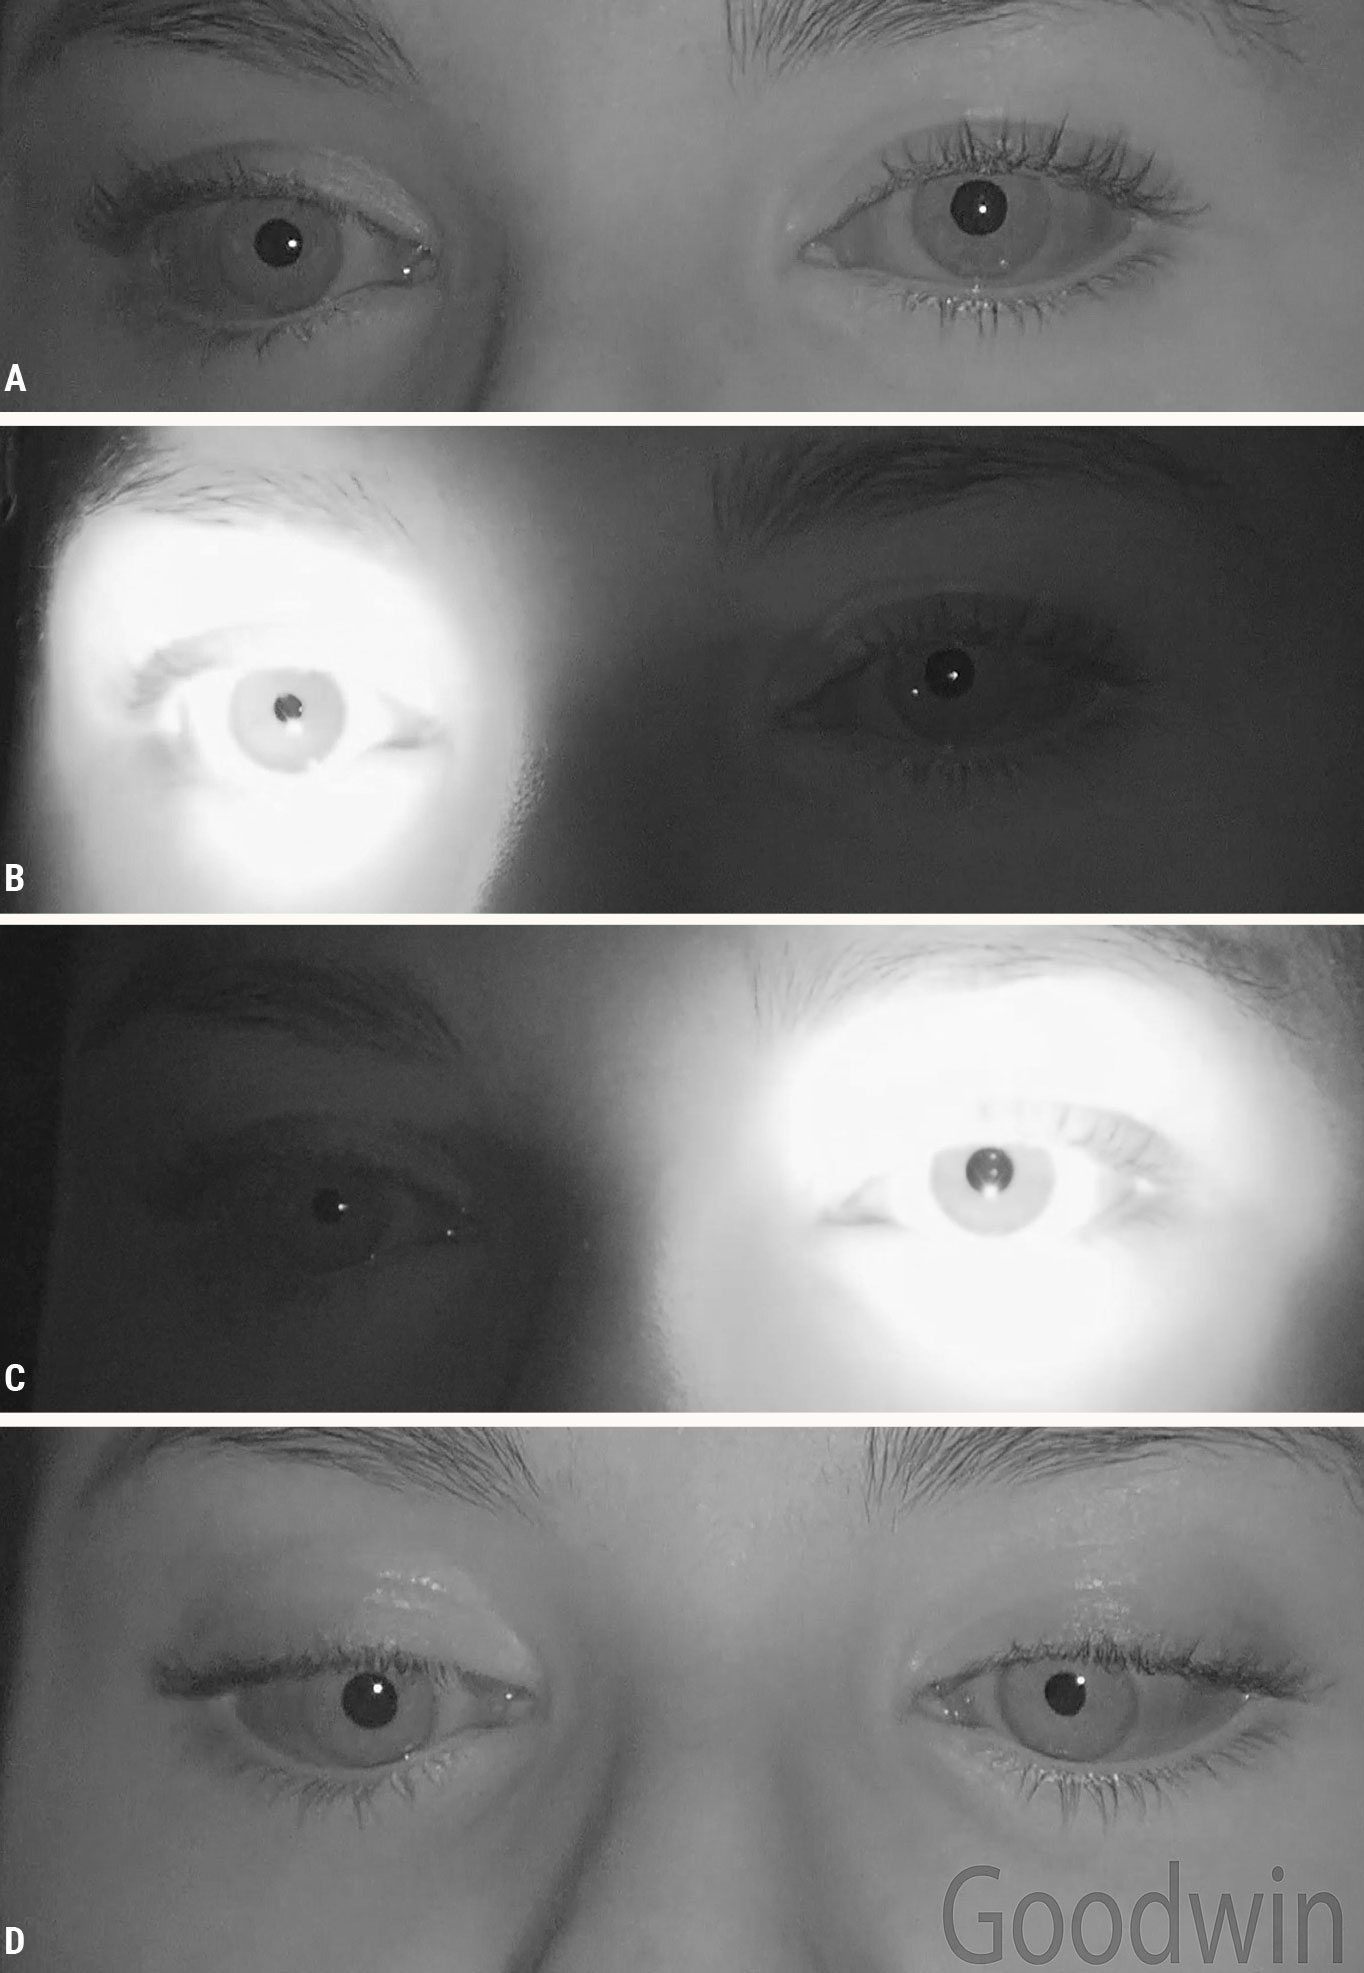 Fig. 5. A left tonic pupil: (A) There is slight anisocoria in dim illumination. (B) The normal right pupil is responsive to light. (C) The tonic left pupil is not responsive to light. When light is shined in the eye the amount of anisocoria is greater. (D) Both eyes constrict to a near target, although the left eye takes longer to constrict maximally.